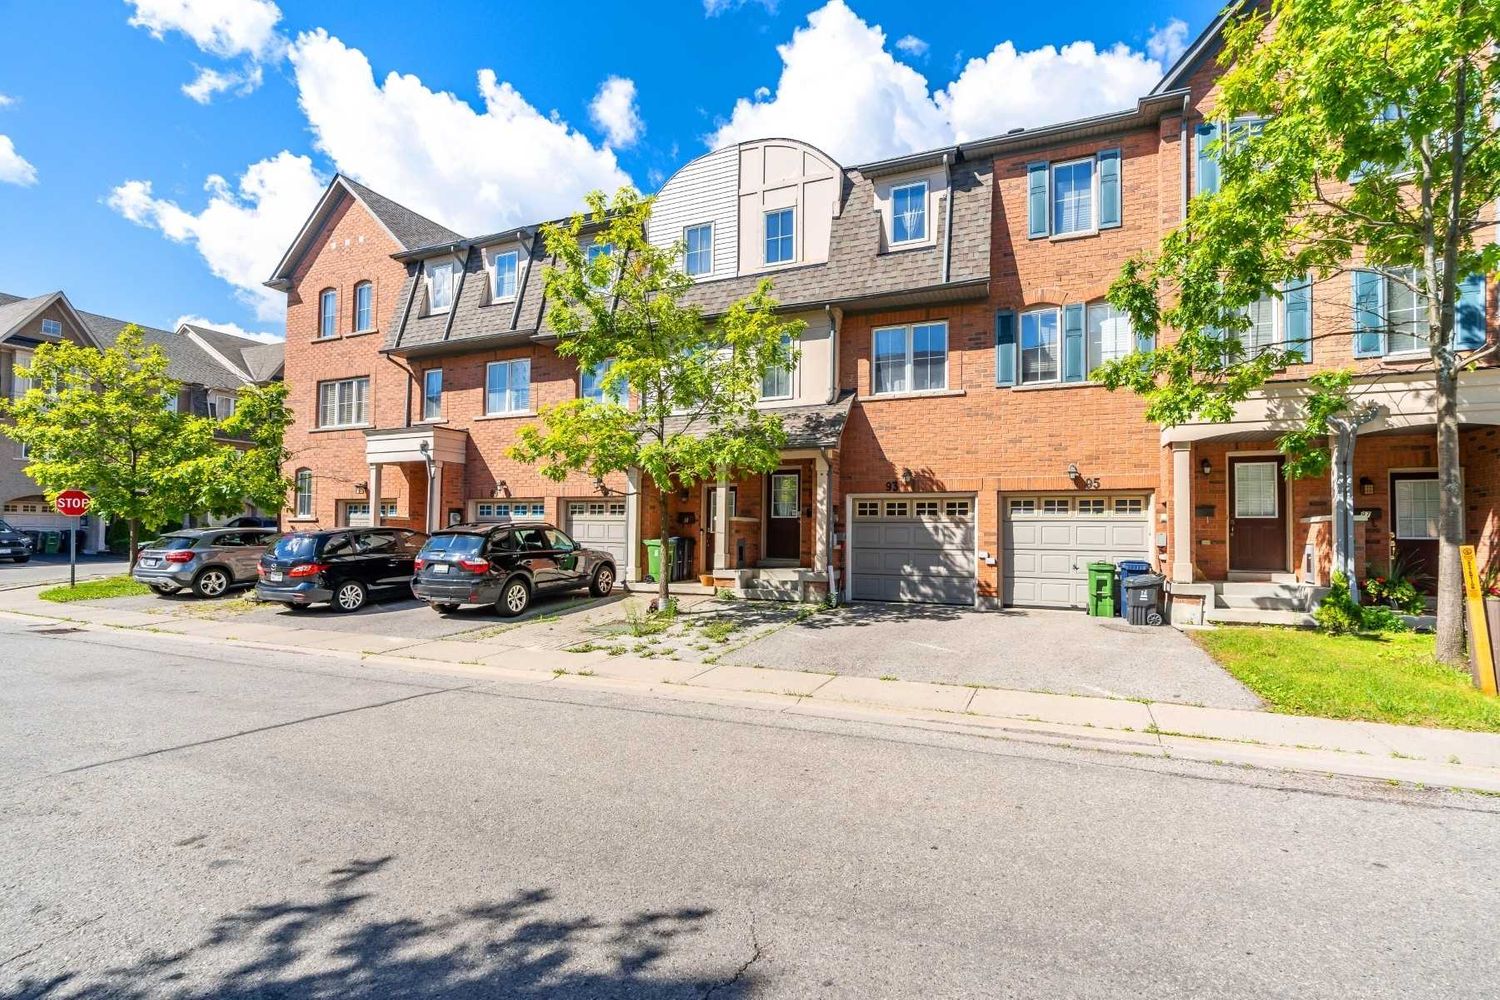 2-172 Jenkinson Way. Lawrence Village Townhomes is located in  Scarborough, Toronto - image #2 of 2